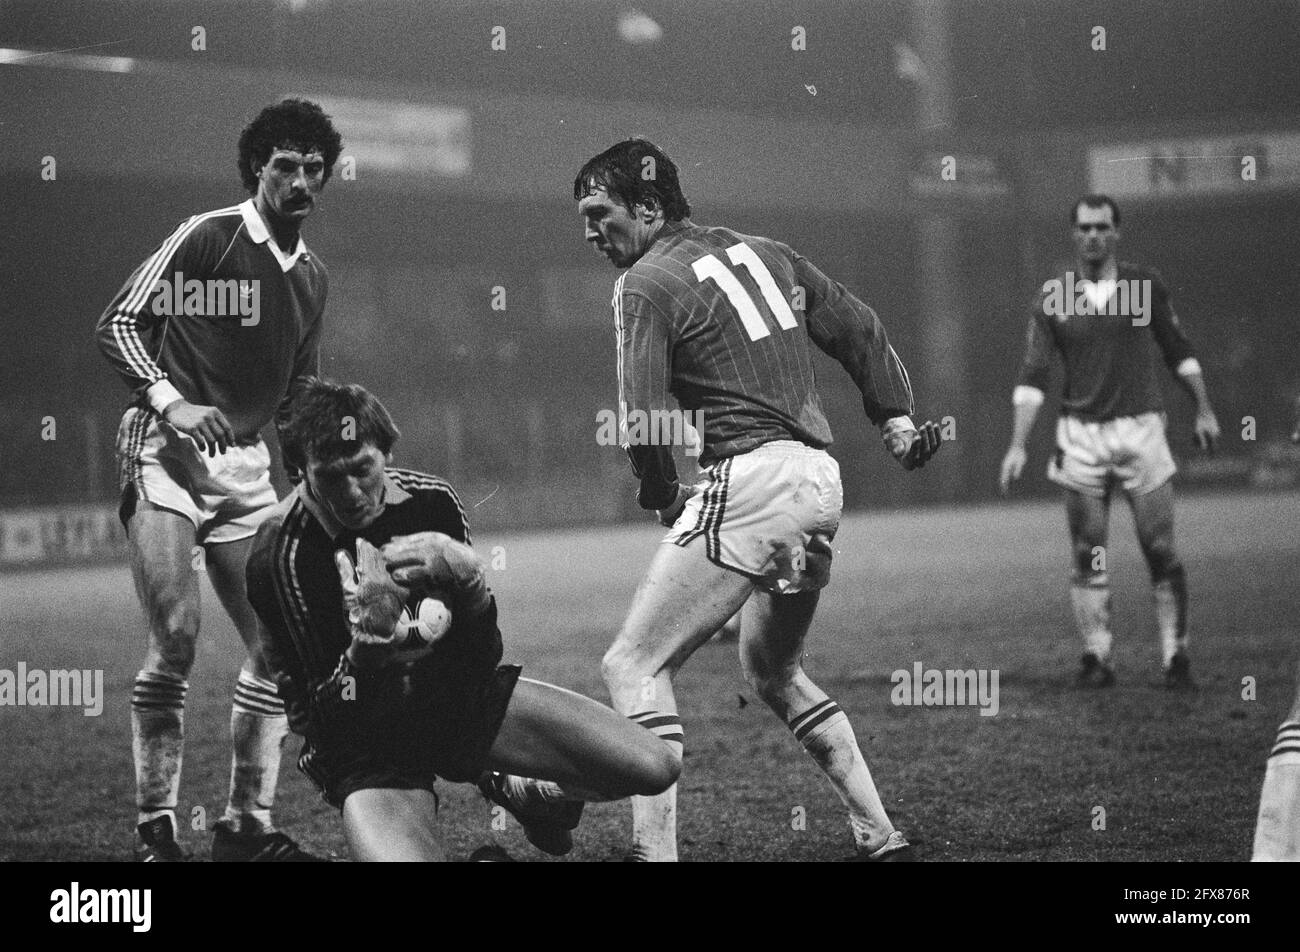 AZ 67 against PSV 0-2. 20.21 Keeper Doesburg (m.) with ball, (r.) Ernie Brandts (l.) Jos Jonker, February 13, 1982, sports, soccer, The Netherlands, 20th century press agency photo, news to remember, documentary, historic photography 1945-1990, visual stories, human history of the Twentieth Century, capturing moments in time Stock Photo